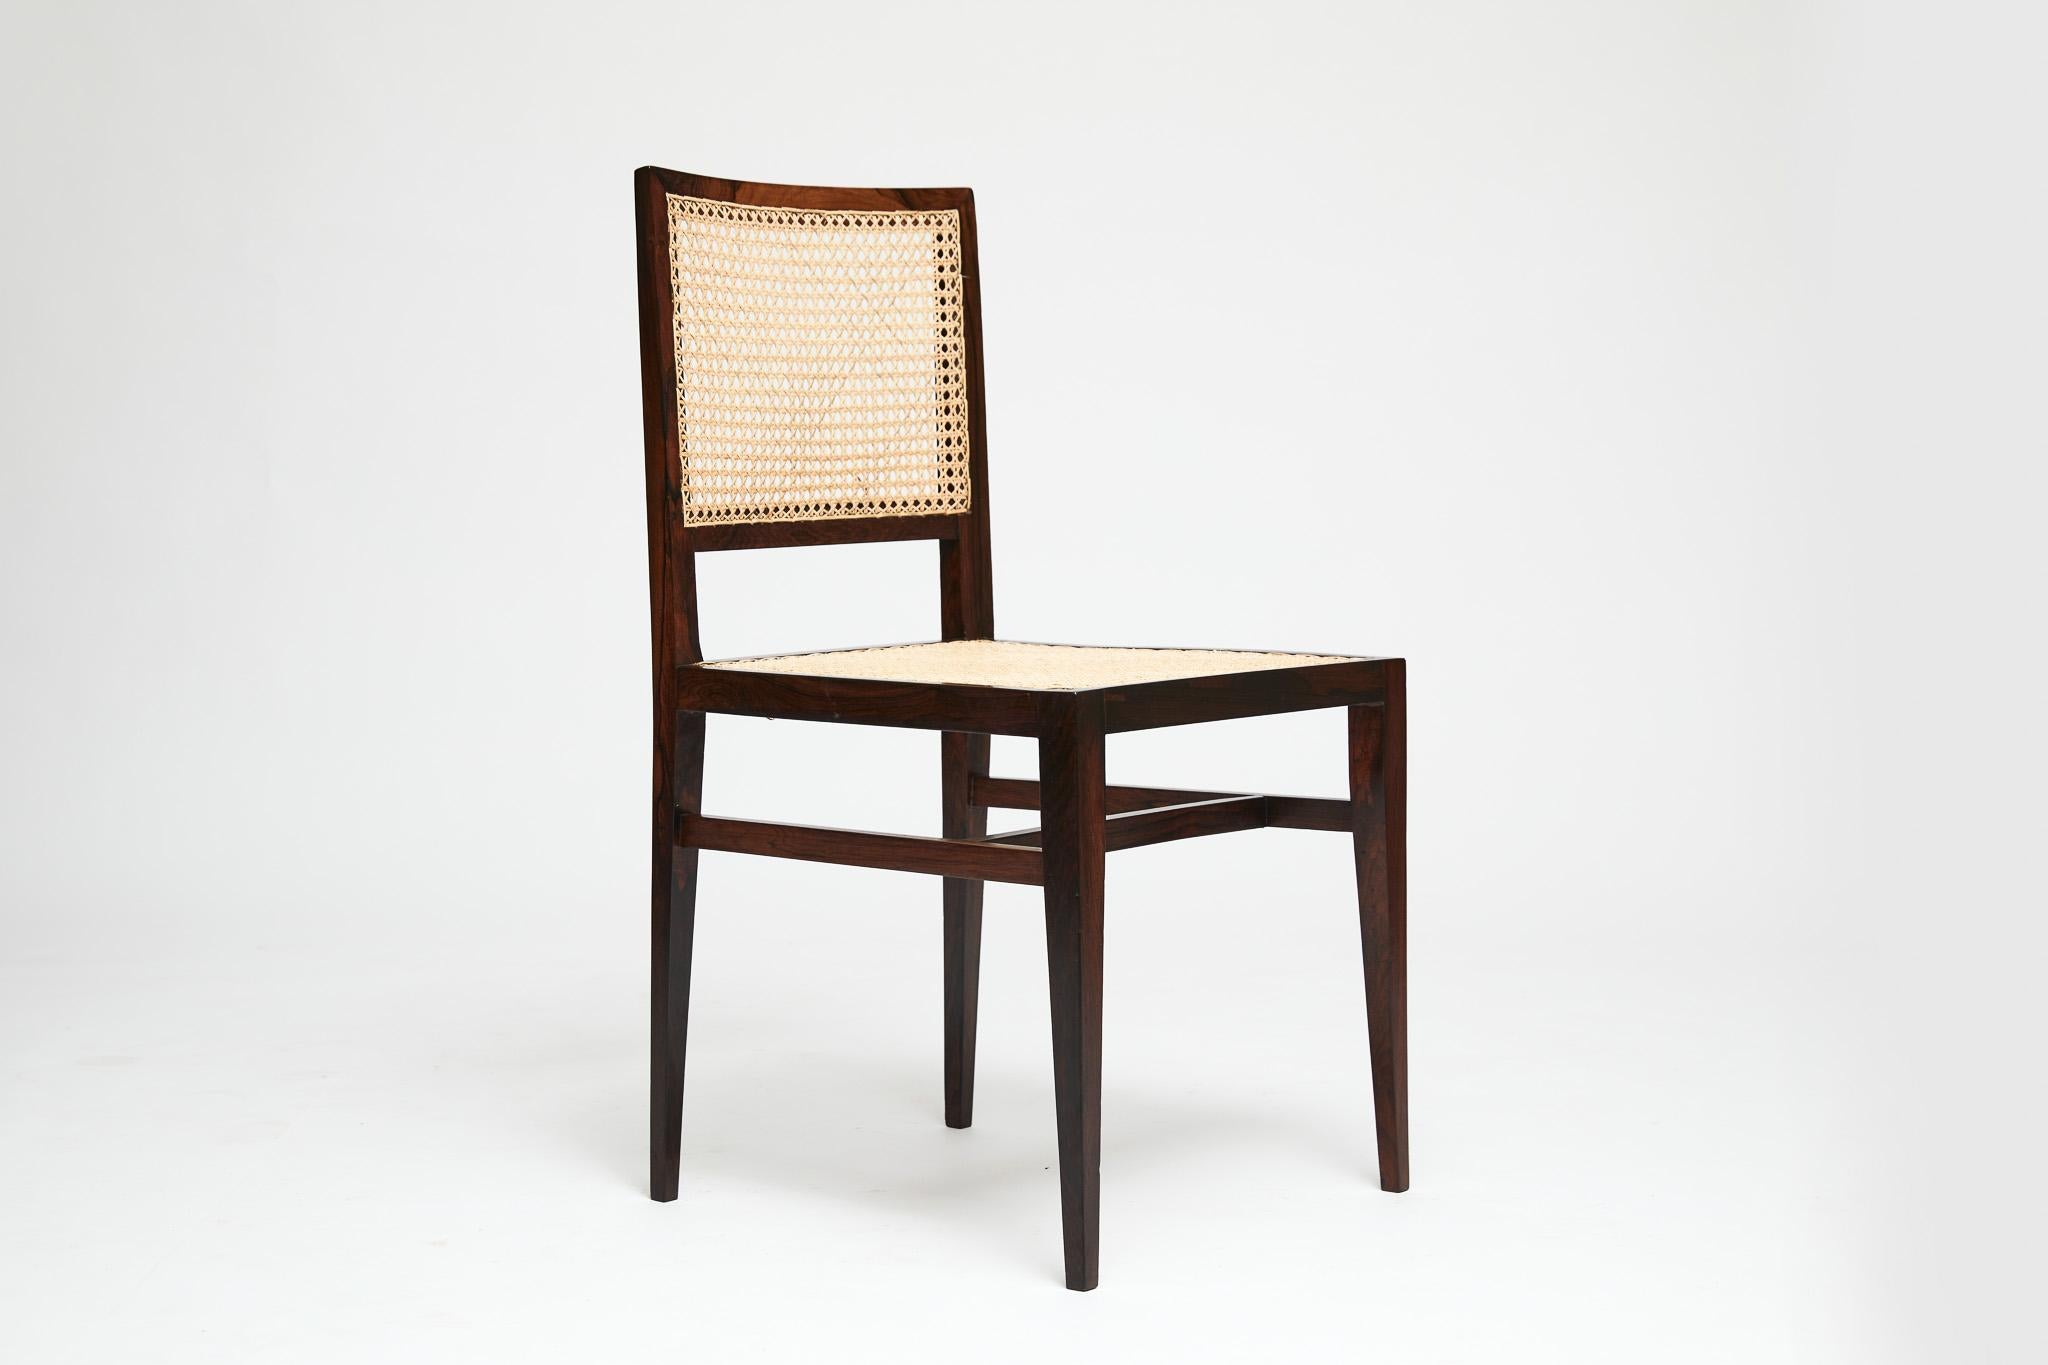 Three Mid-Century Modern Hardwood & Cane Chairs by Joaquim Tenreiro, 1950 Brazil In Good Condition For Sale In New York, NY